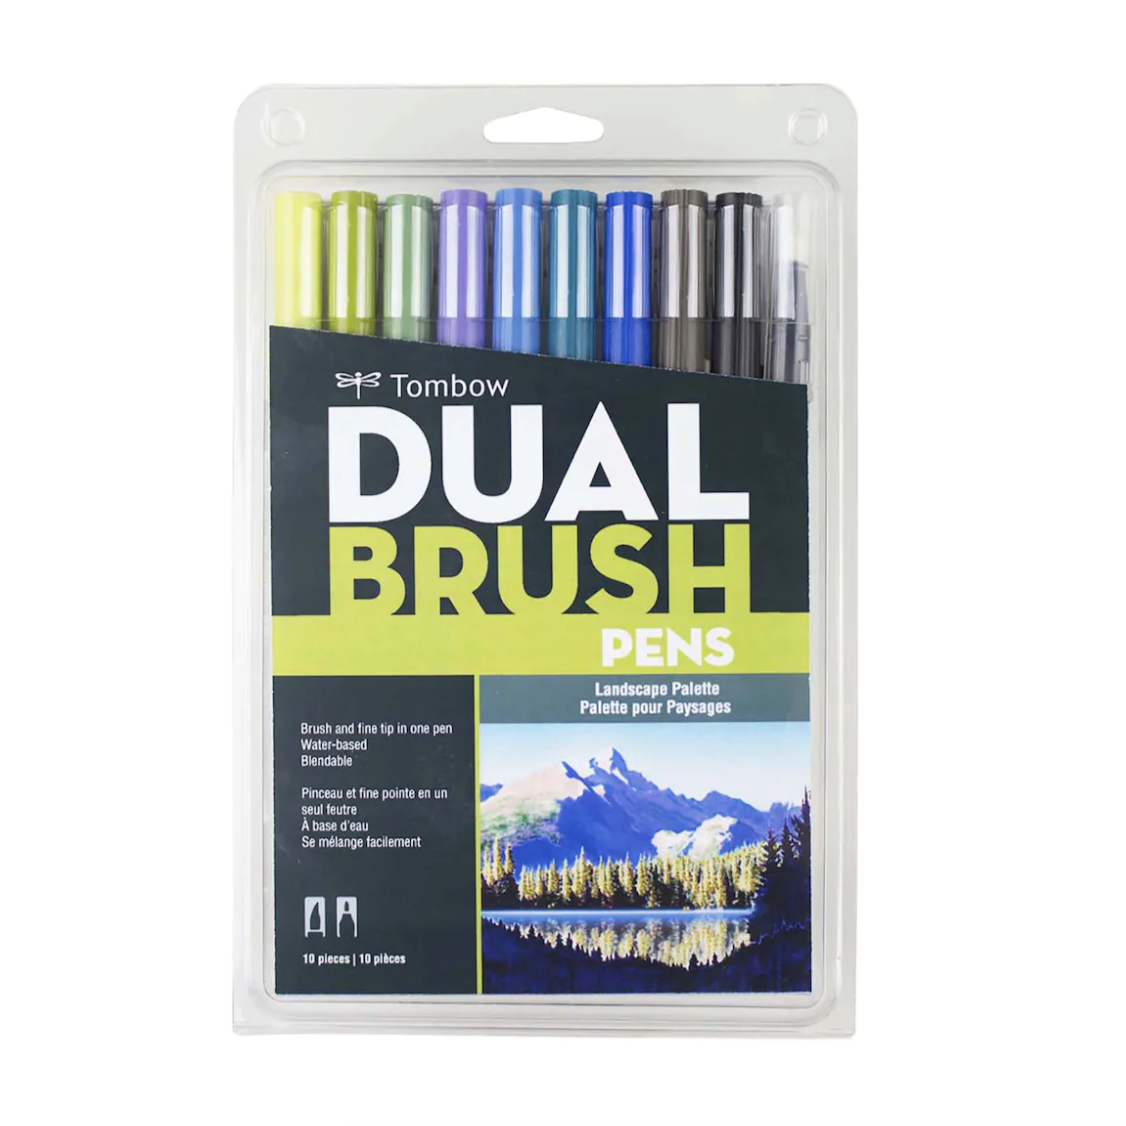 Buy 24 Pack Dual Brush Pen Art Markers - Colored Fine Tip Markers